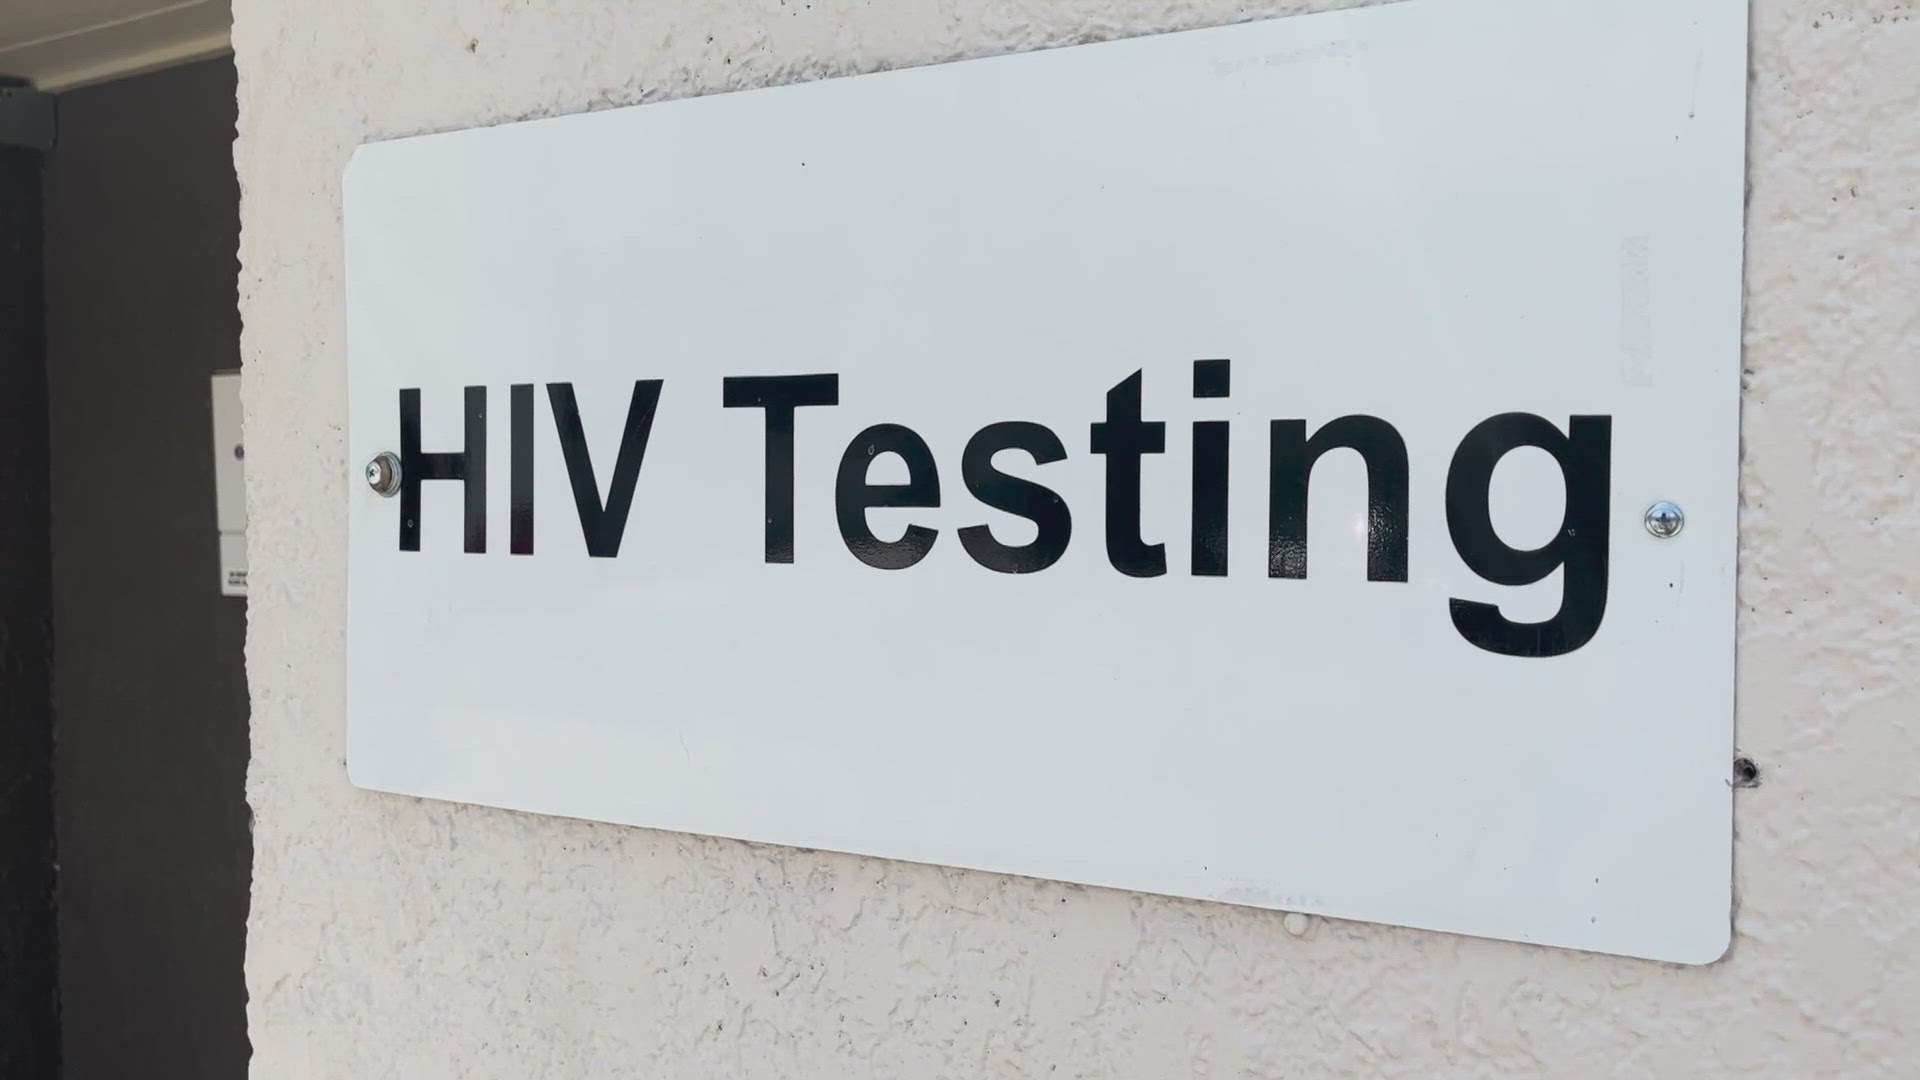 The foundation has had a 57% increase in people getting tested.